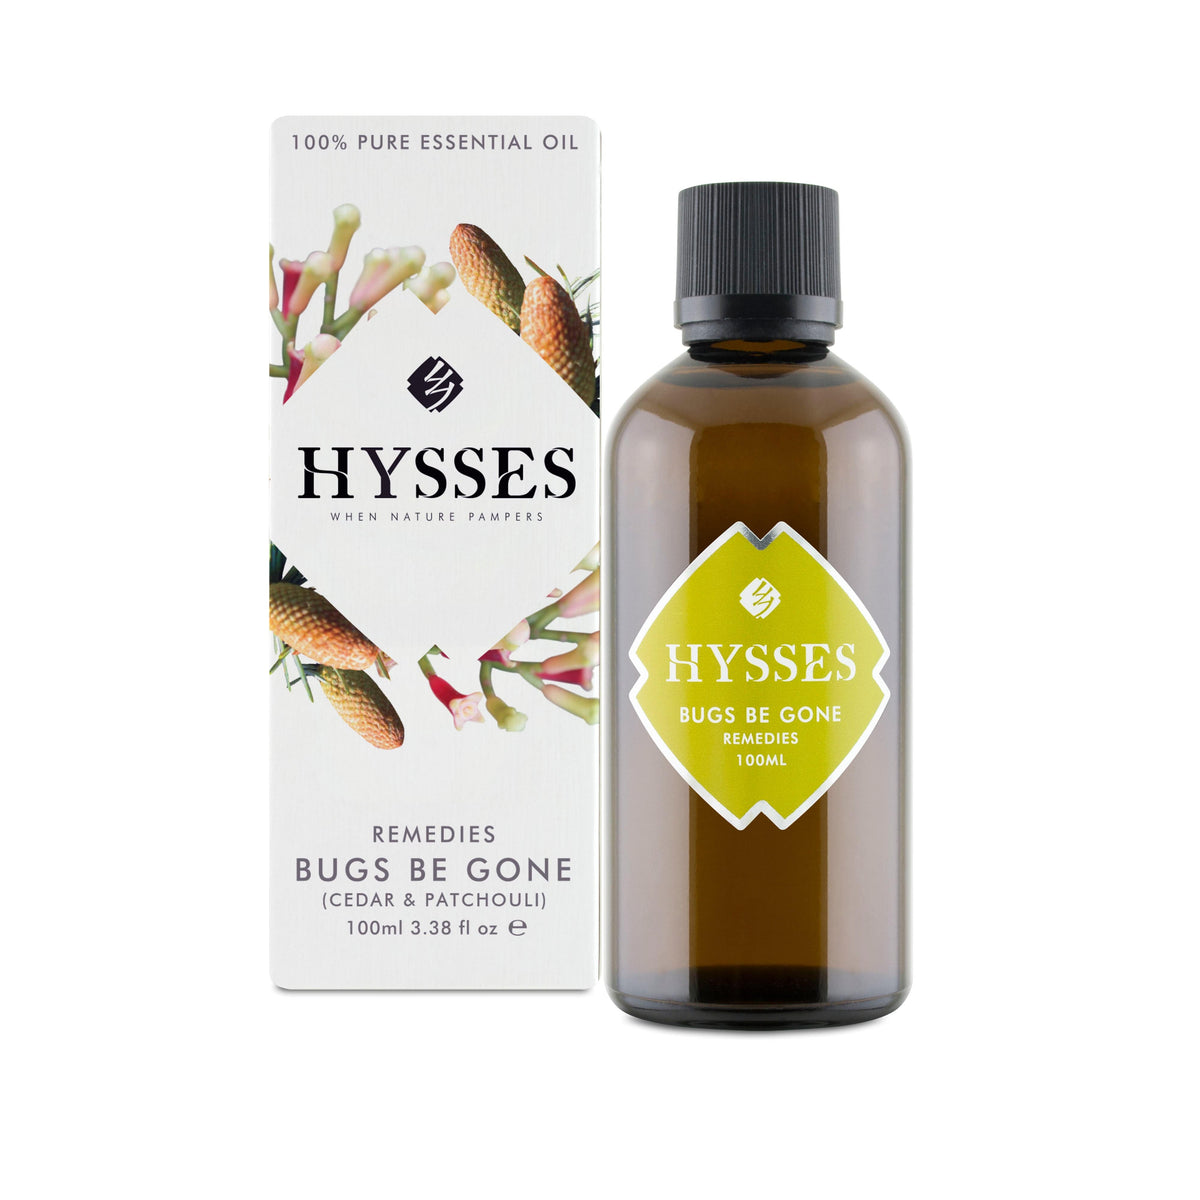 Hysses Essential Oil Remedies, Bugs Be Gone